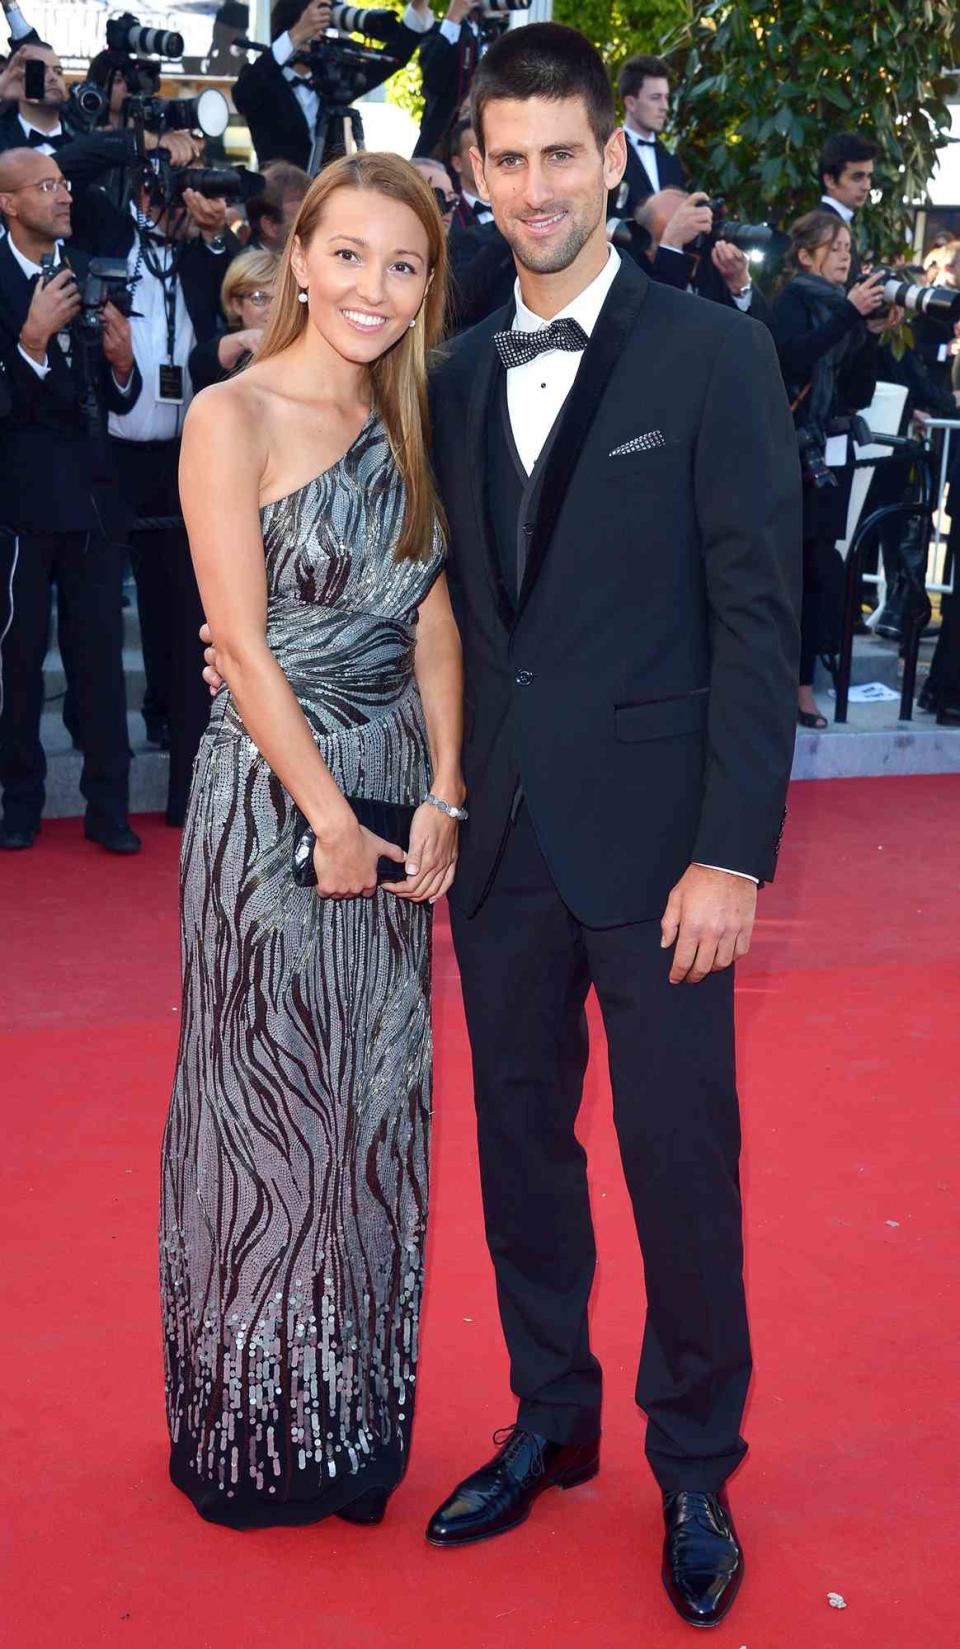 Jelena Ristic and tennis player Novak Djokovic attend the &quot;Killing Them Softly&quot; Premiere during the 65th Annual Cannes Film Festival at Palais des Festivals on May 22, 2012 in Cannes, France